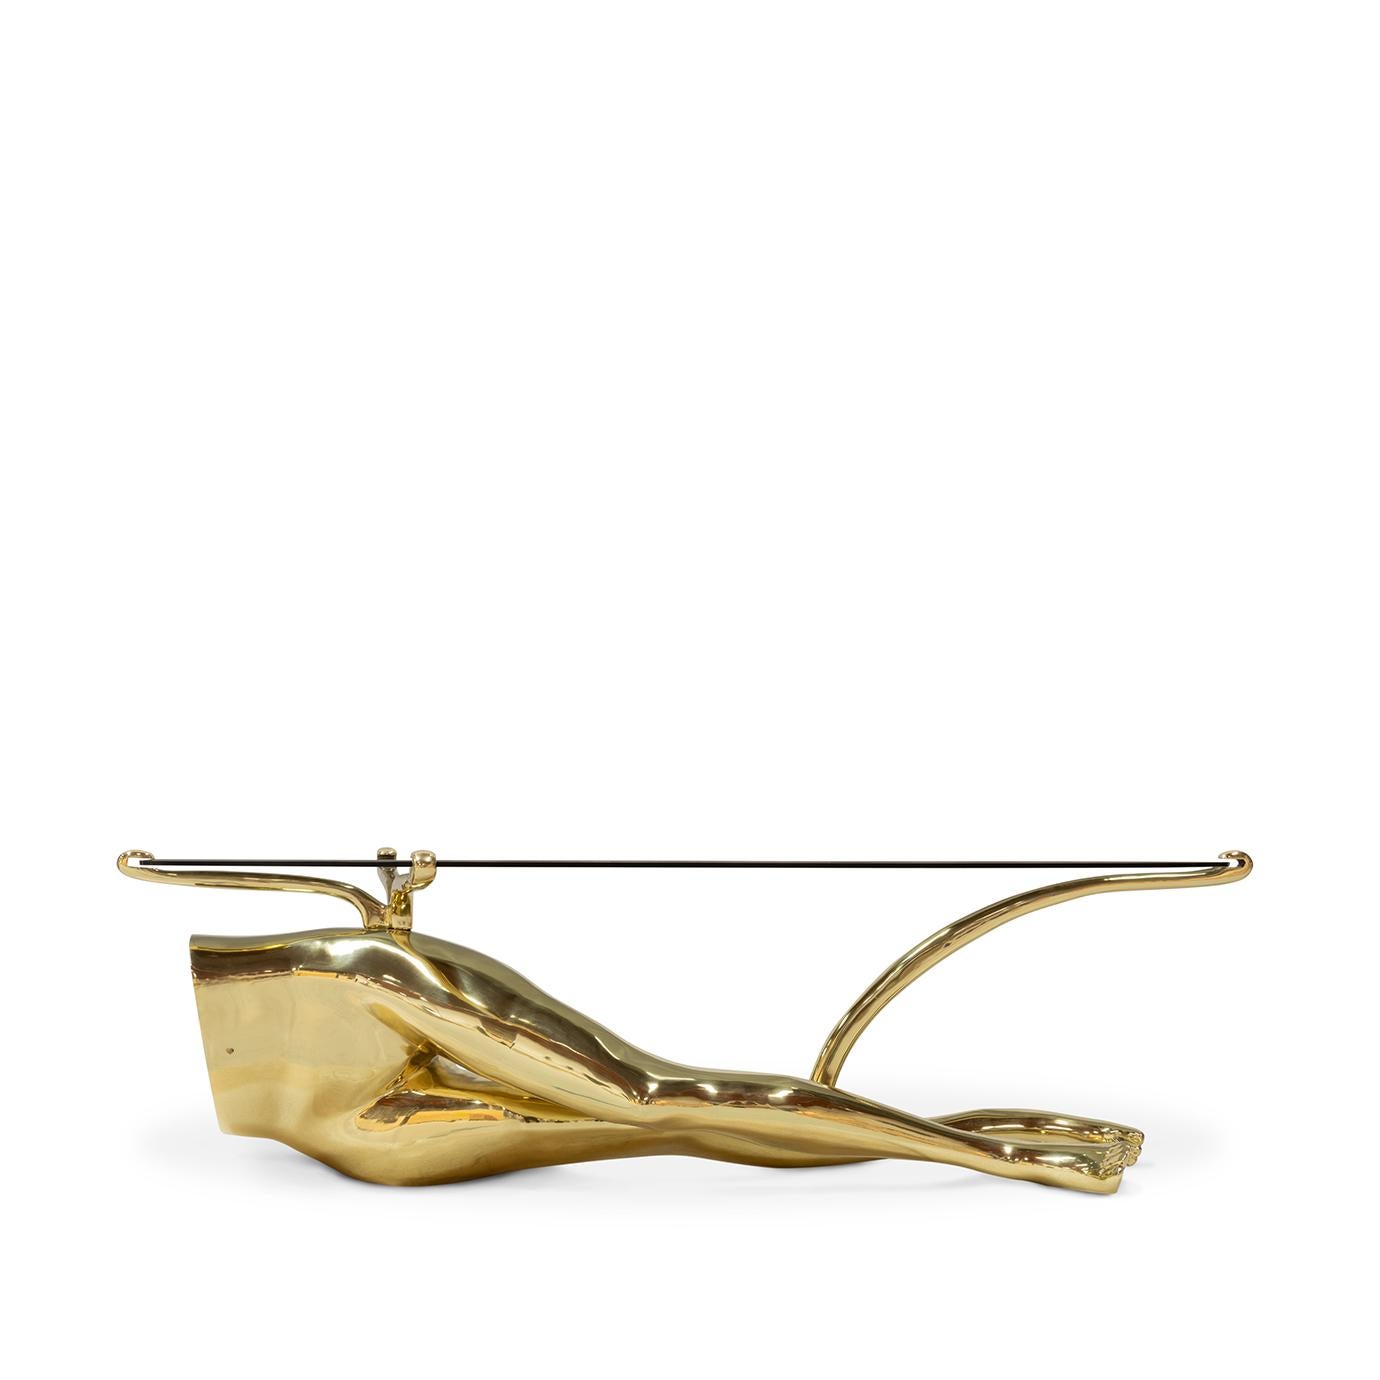 Add sex appeal and whimsy to your living room with the Tabu Cocktail Table. Sensual brass legs stretch out beneath a sophisticated bronze glass top to create the perfect conversation starter for your next cocktail party.